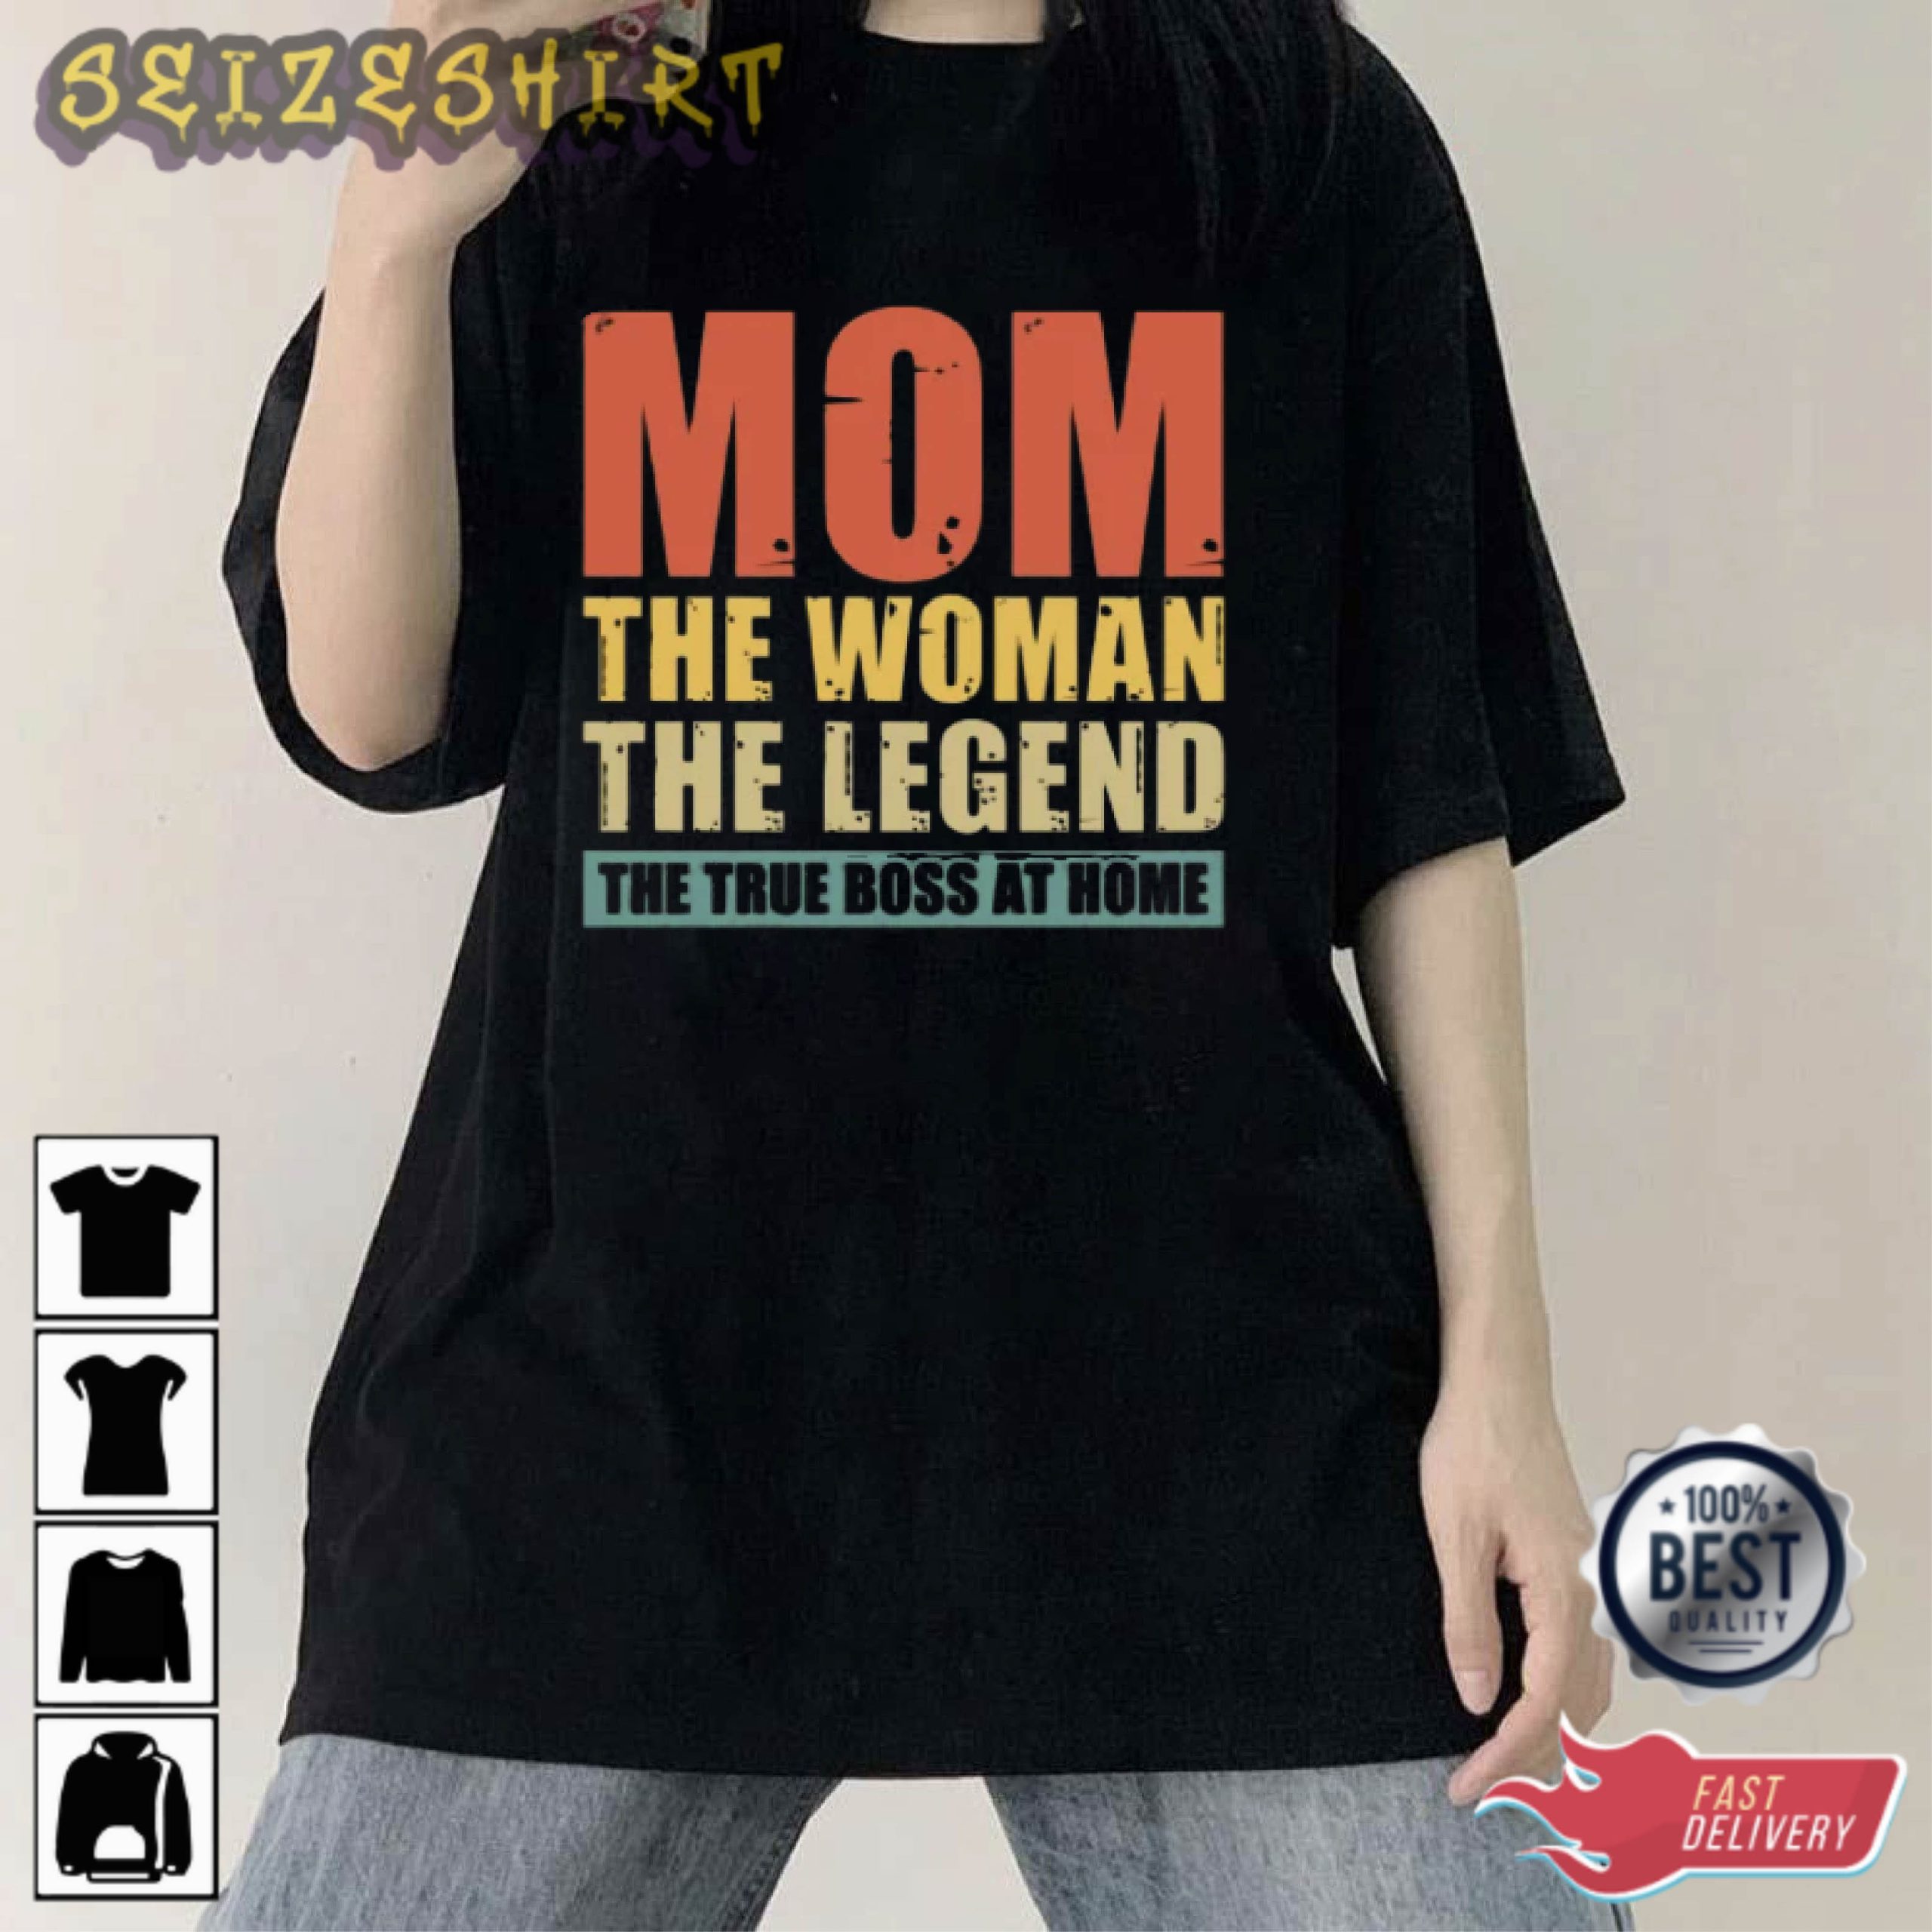 Mom The Woman The Legend T-Shirt